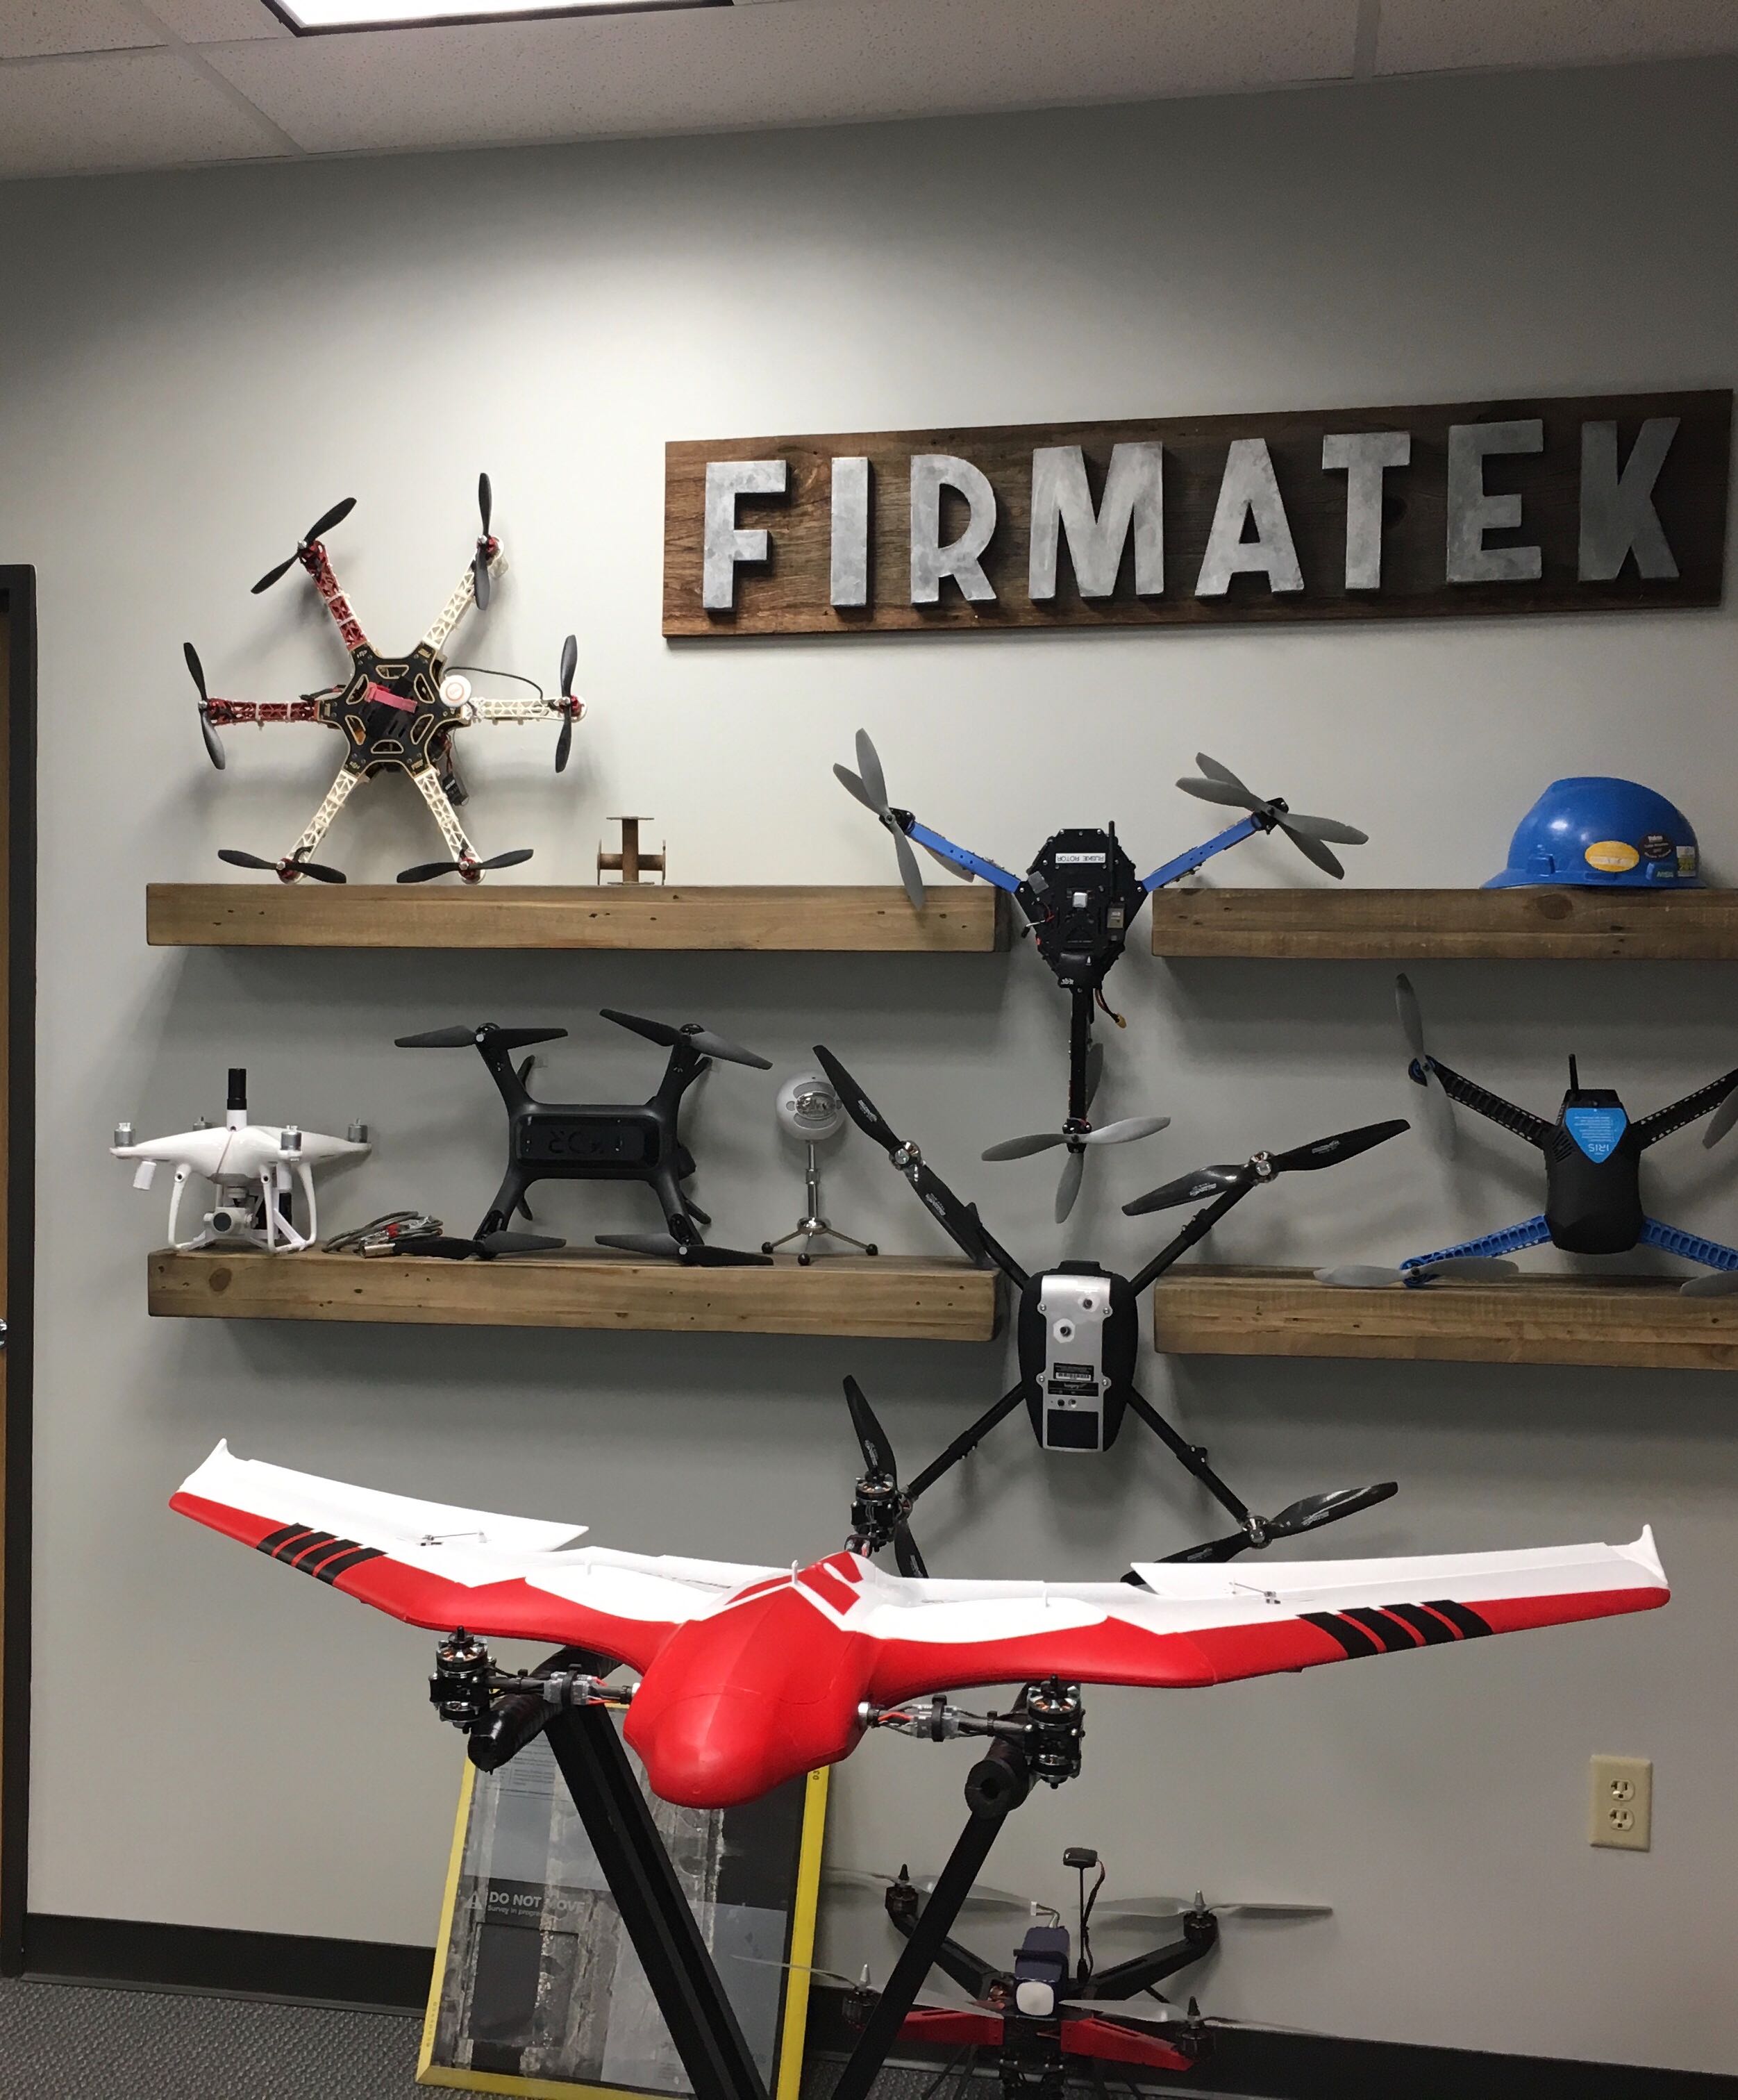 Firmatek on Twitter: "We have an to our drone collection and we're excited... Welcome to the Firmatek drone family, #FireFLY6Pro! Drone from #BirdsEyeView Aerobotics. #drone #firefly #team #tuesday #aerobotics #data #technology